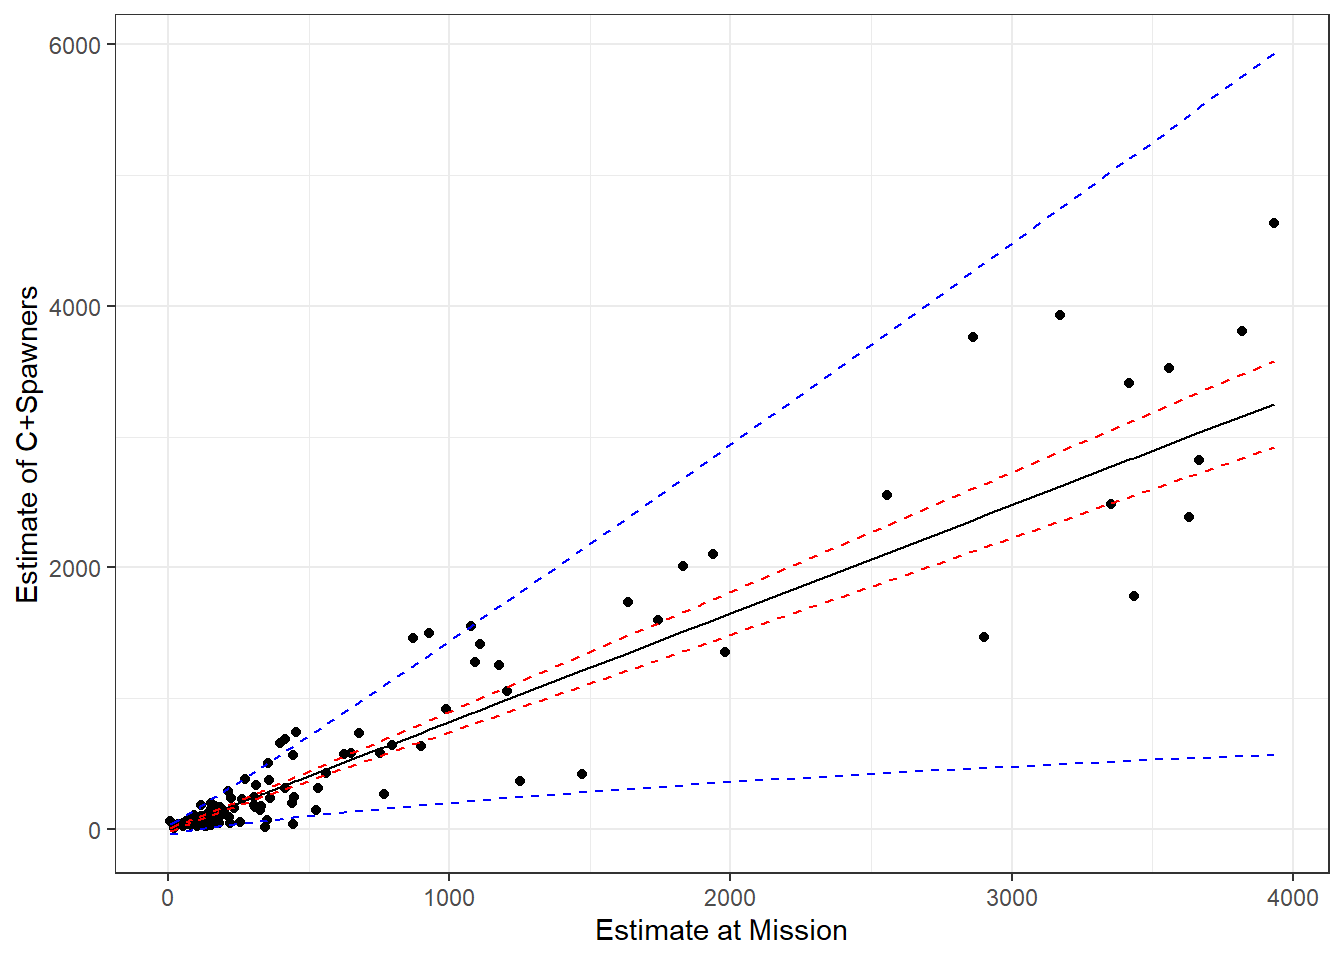 Predictions for the catch and spawning escapement based no the count of sockeye salmon at Mission. Blue and red lines depict 95% prediction and confidence intervals, respectively.